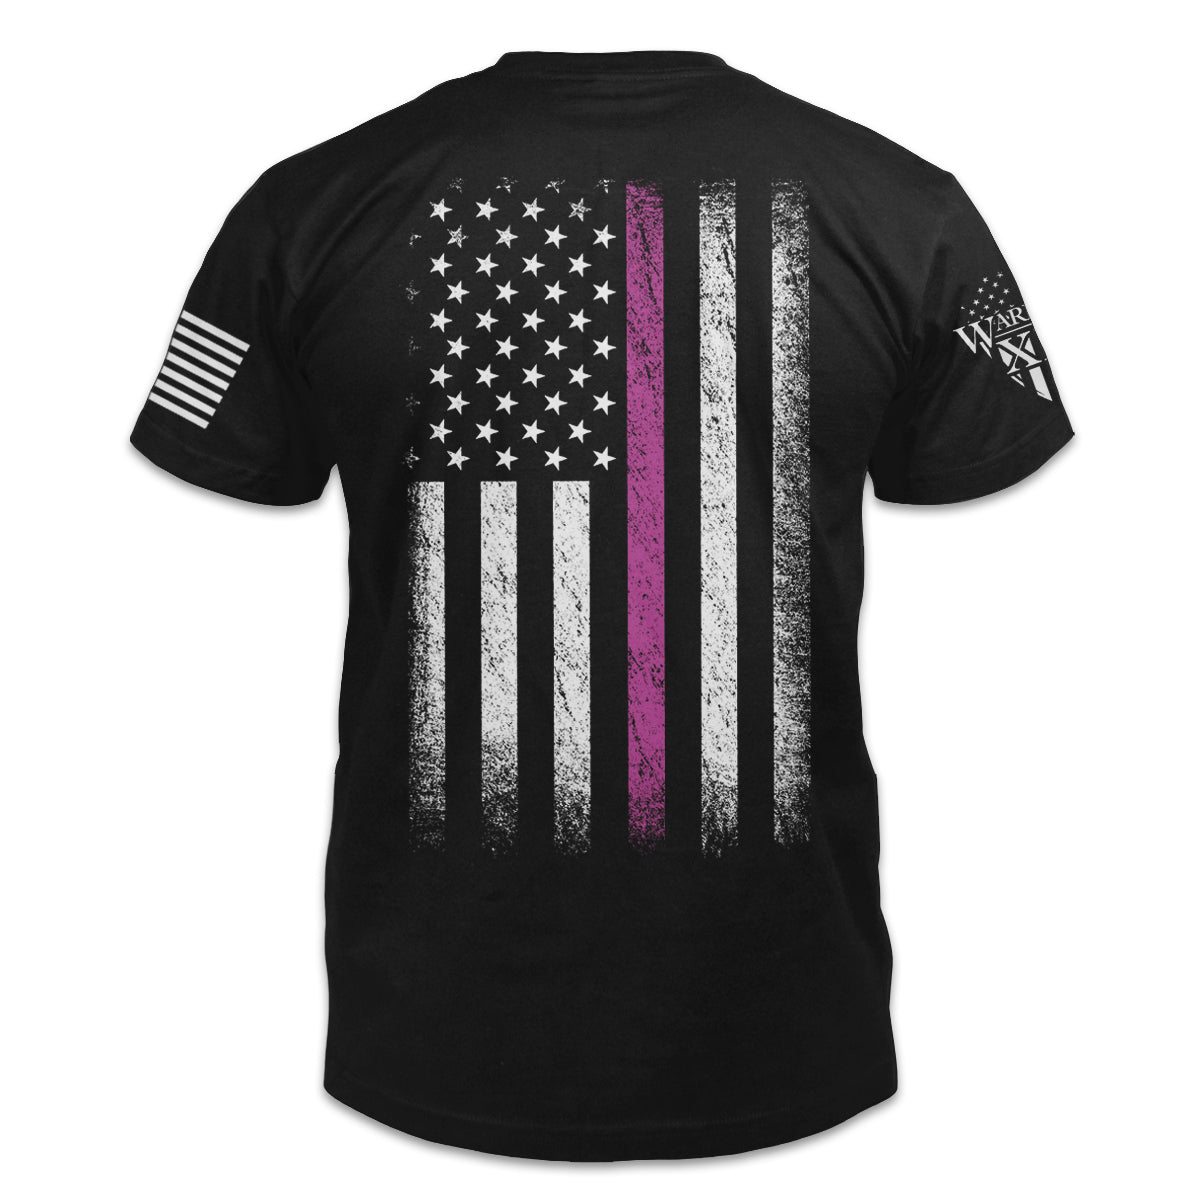 A black t-shirt with shirt features a thin pink line flag to show support for all breast cancer warriors printed on the back of the shirt.